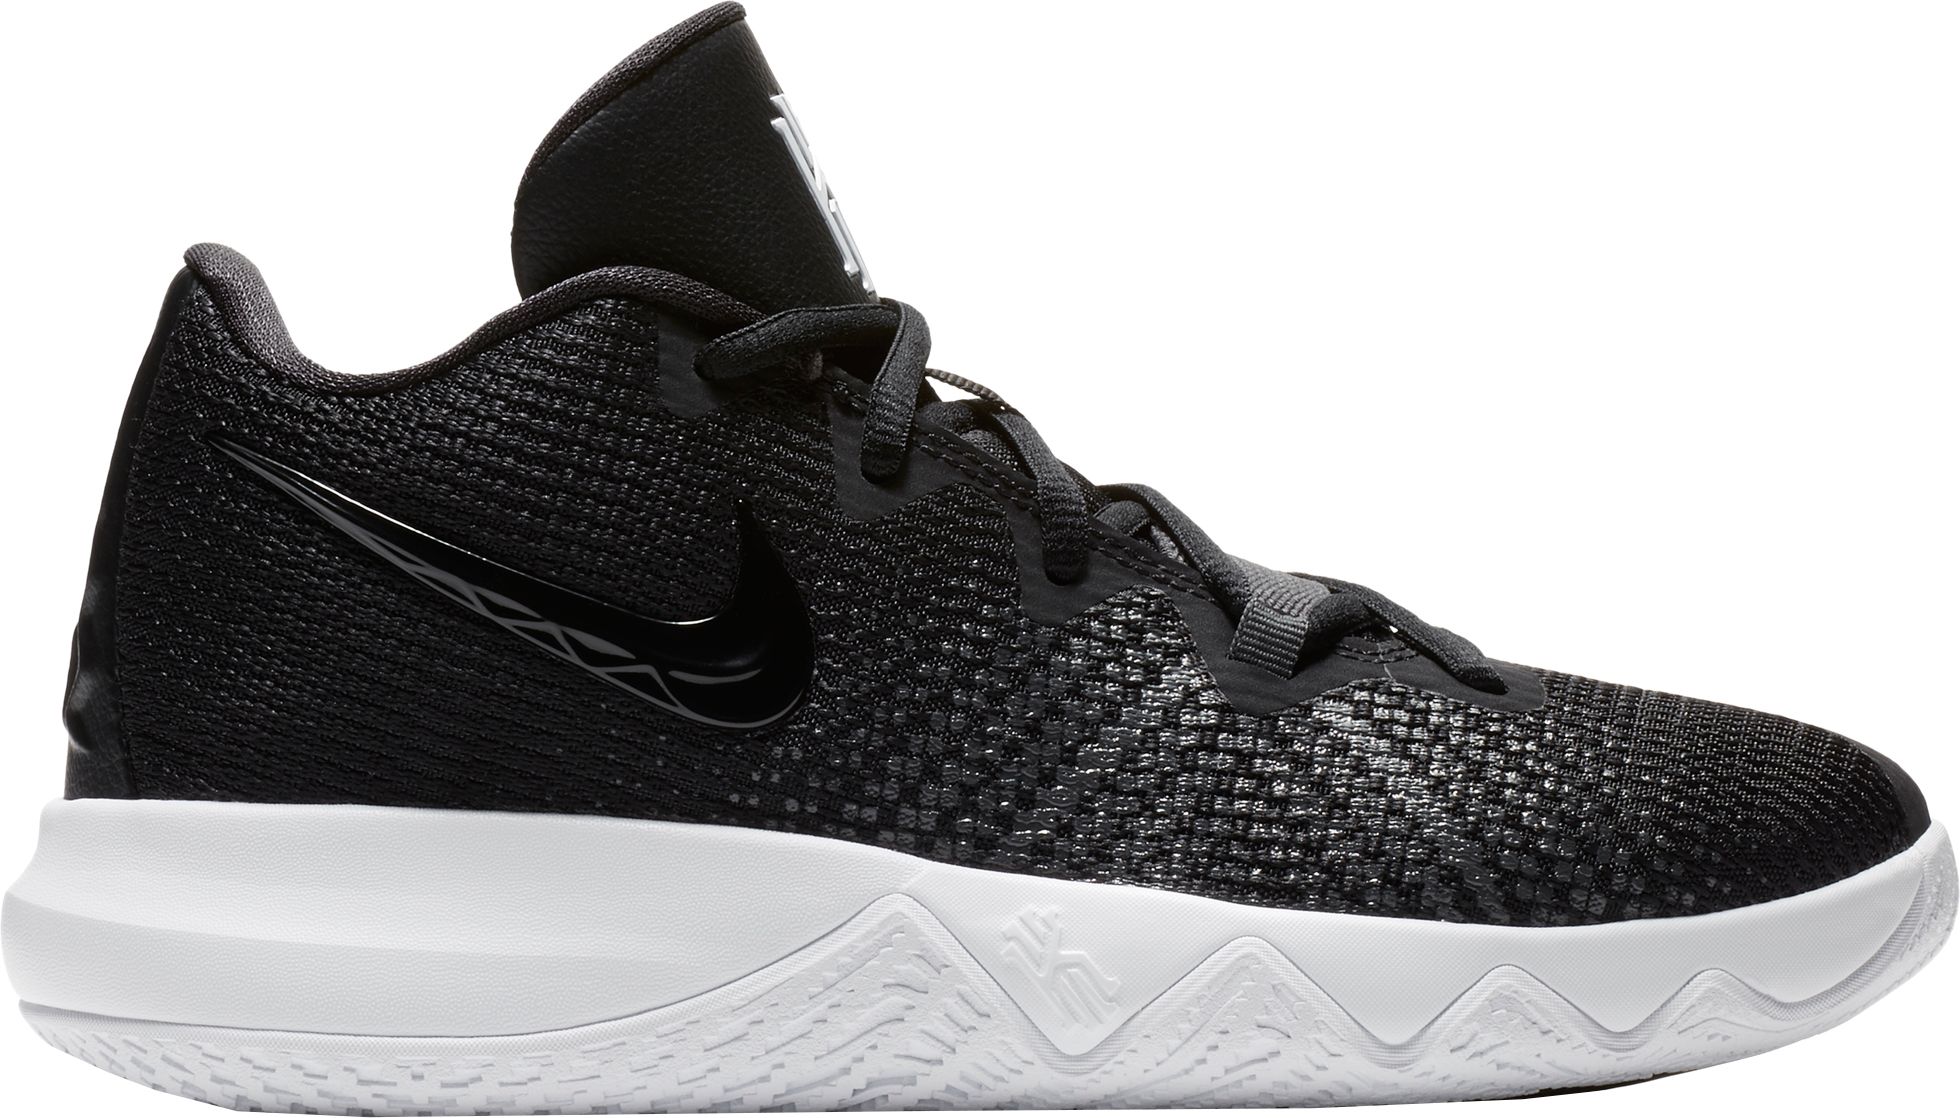 kyrie flytrap youth basketball shoes